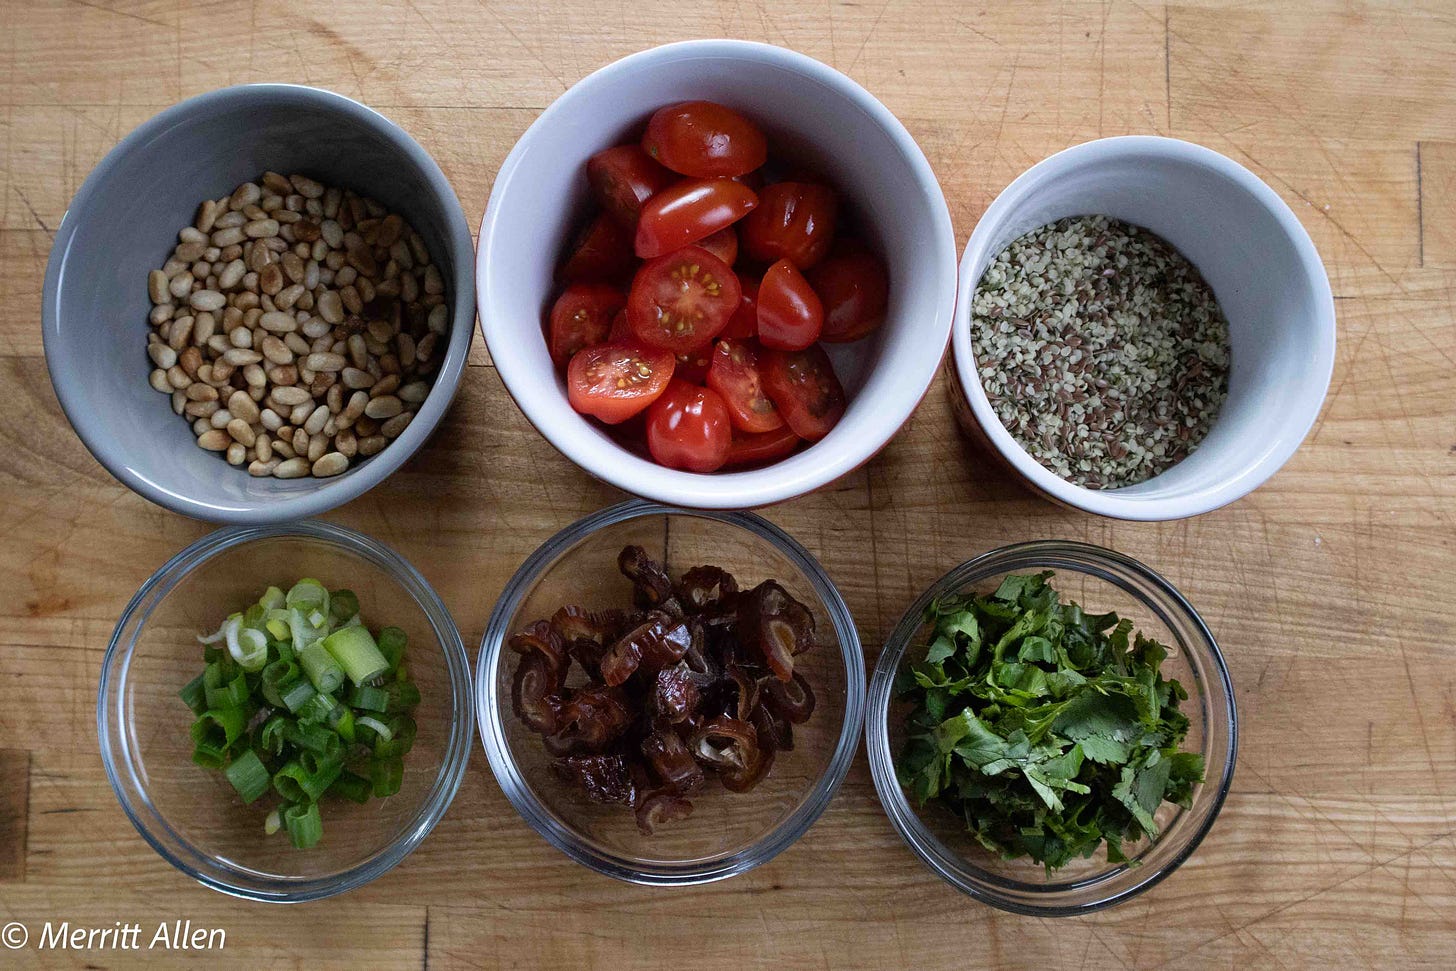 Toppings for spinach and arugula salad